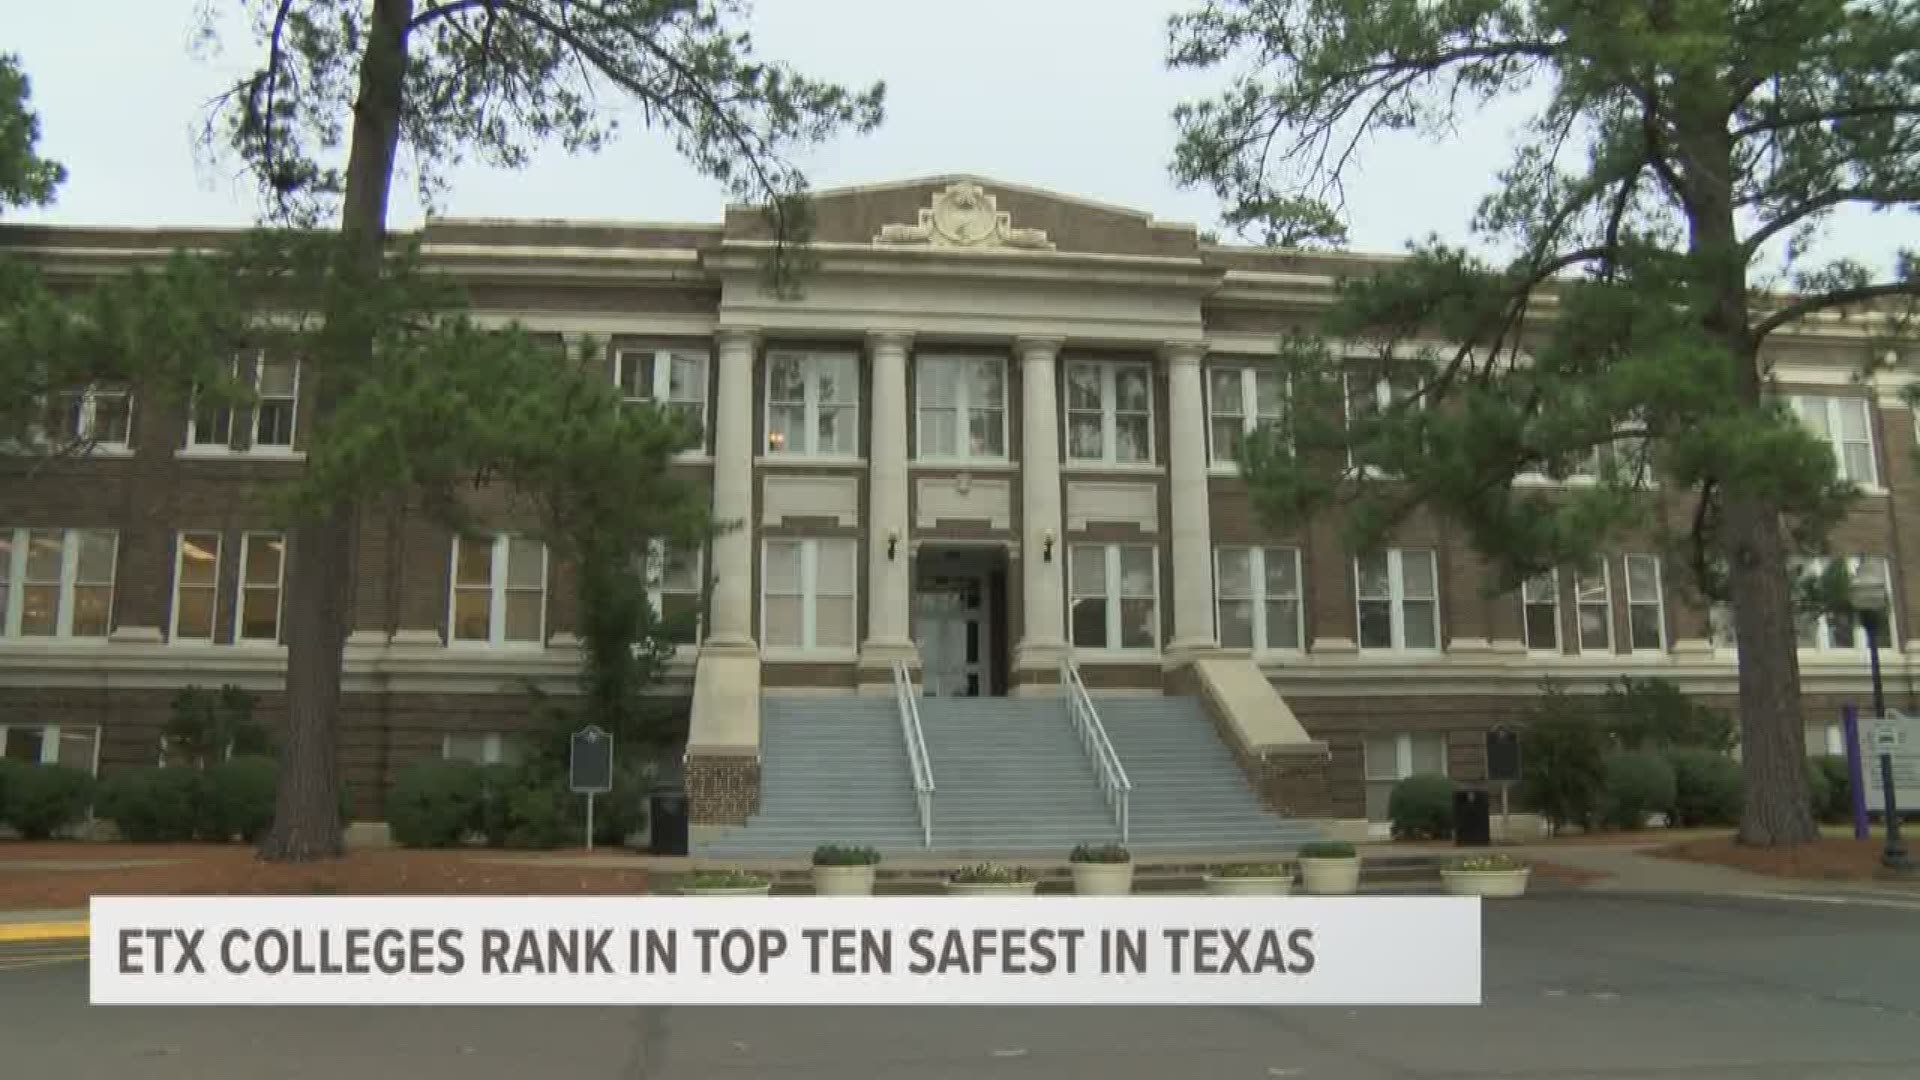 The University Of Texas at Tyler ranks in the top ten safest in Texas